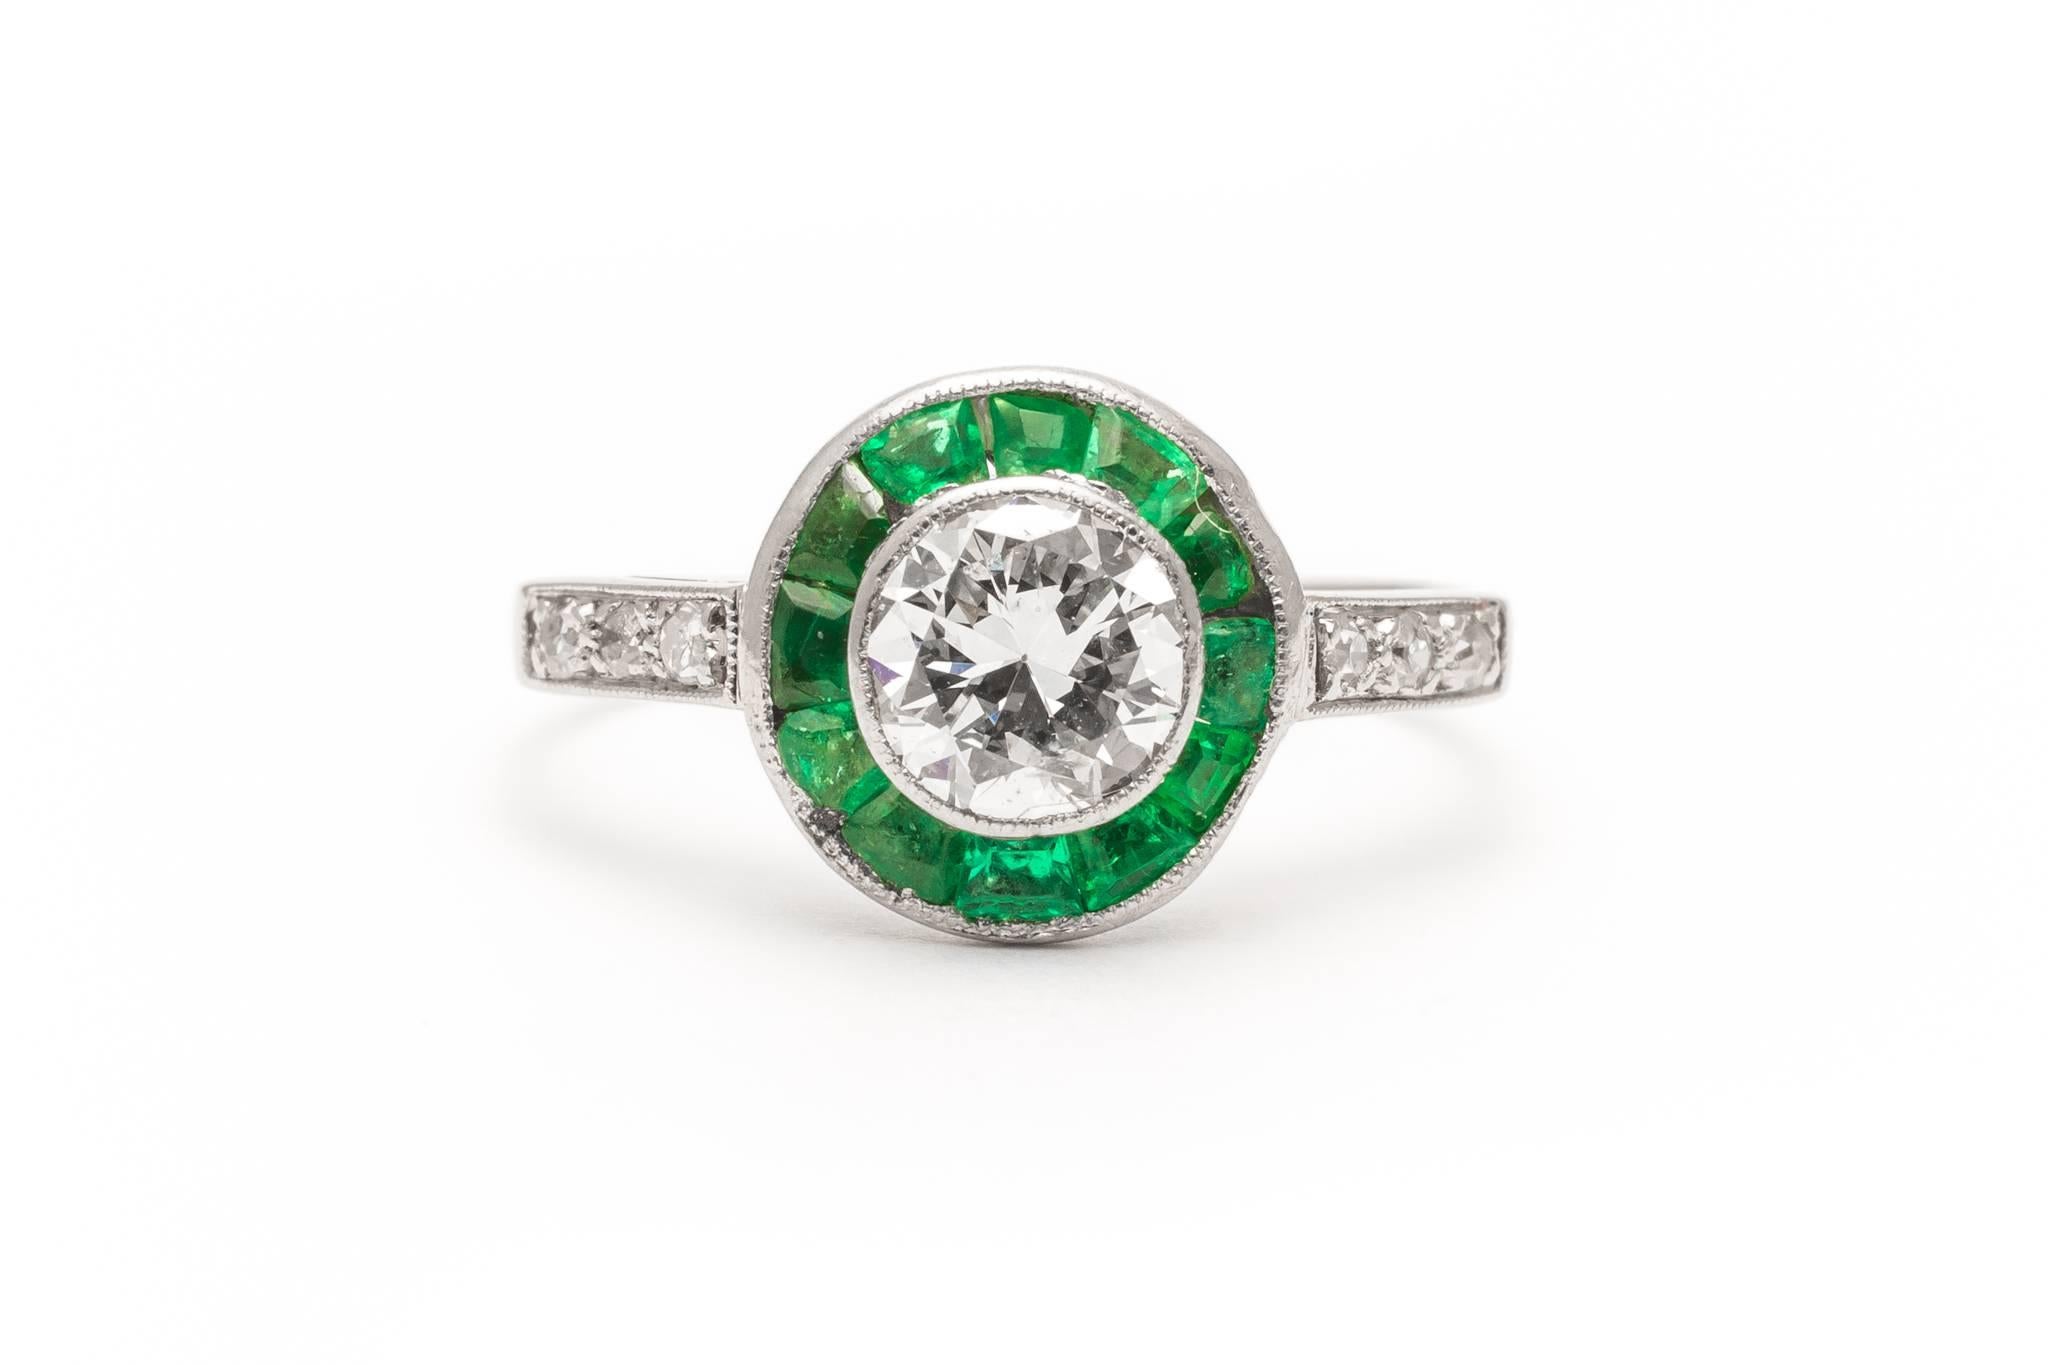 Beacon Hill Jewelers Presents:

An original art deco period diamond and emerald target style ring in luxurious platinum. Handmade in England, this ring features a central 0.80 carat European cut diamond framed by a halo of a dozen natural emeralds